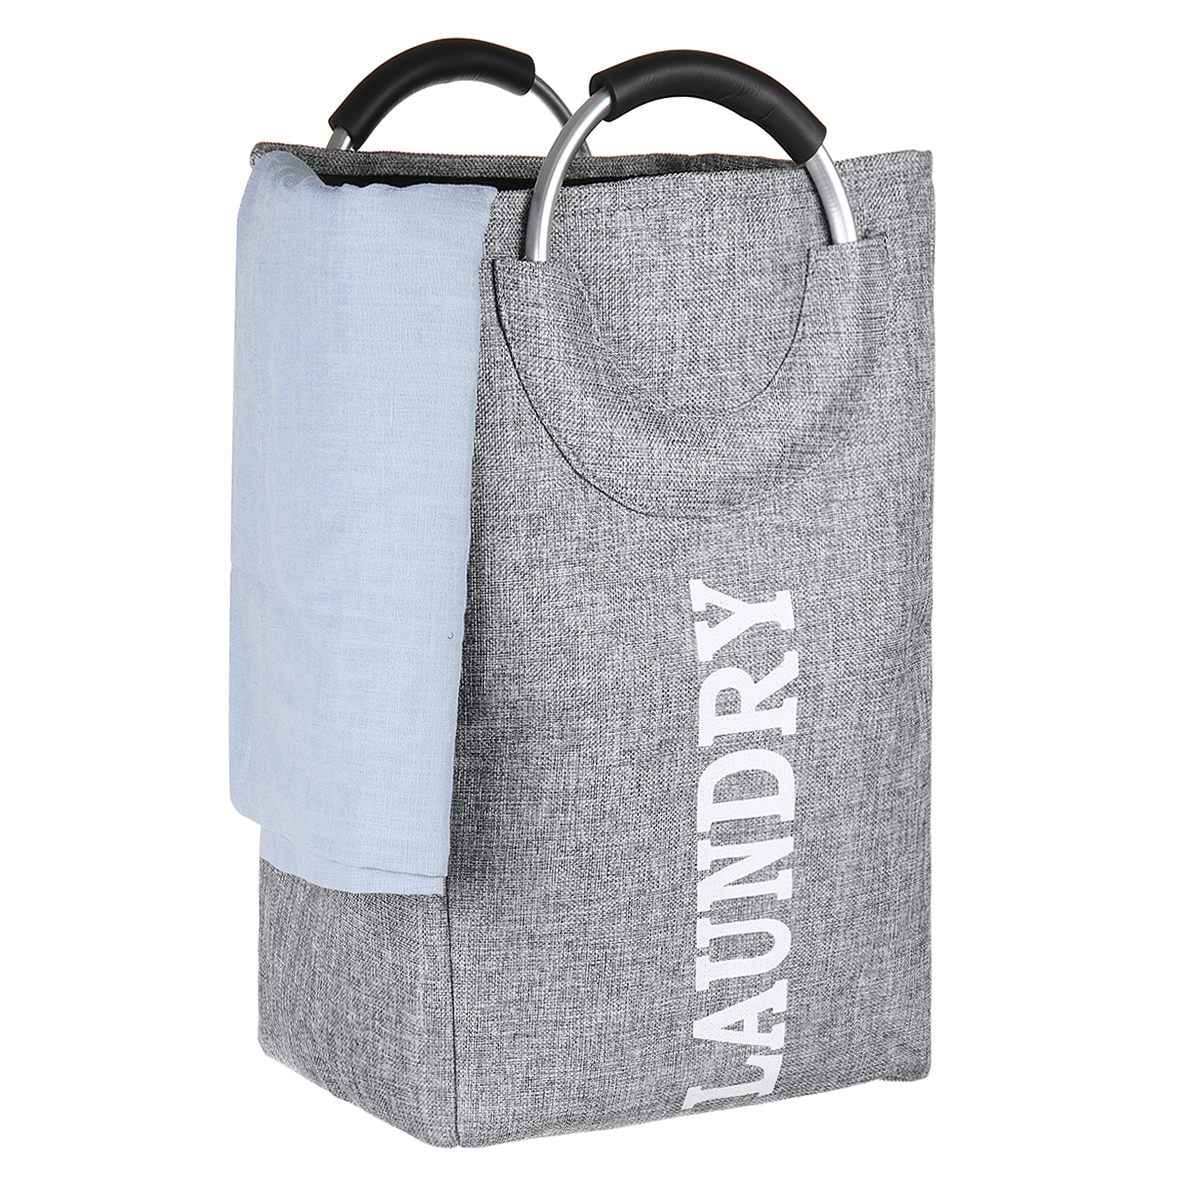 Portable-Foldable-Oxford-Laundry-Washing-Dirty-Clothes-Storage-Baskets-Bag-Hamper-1642044-2